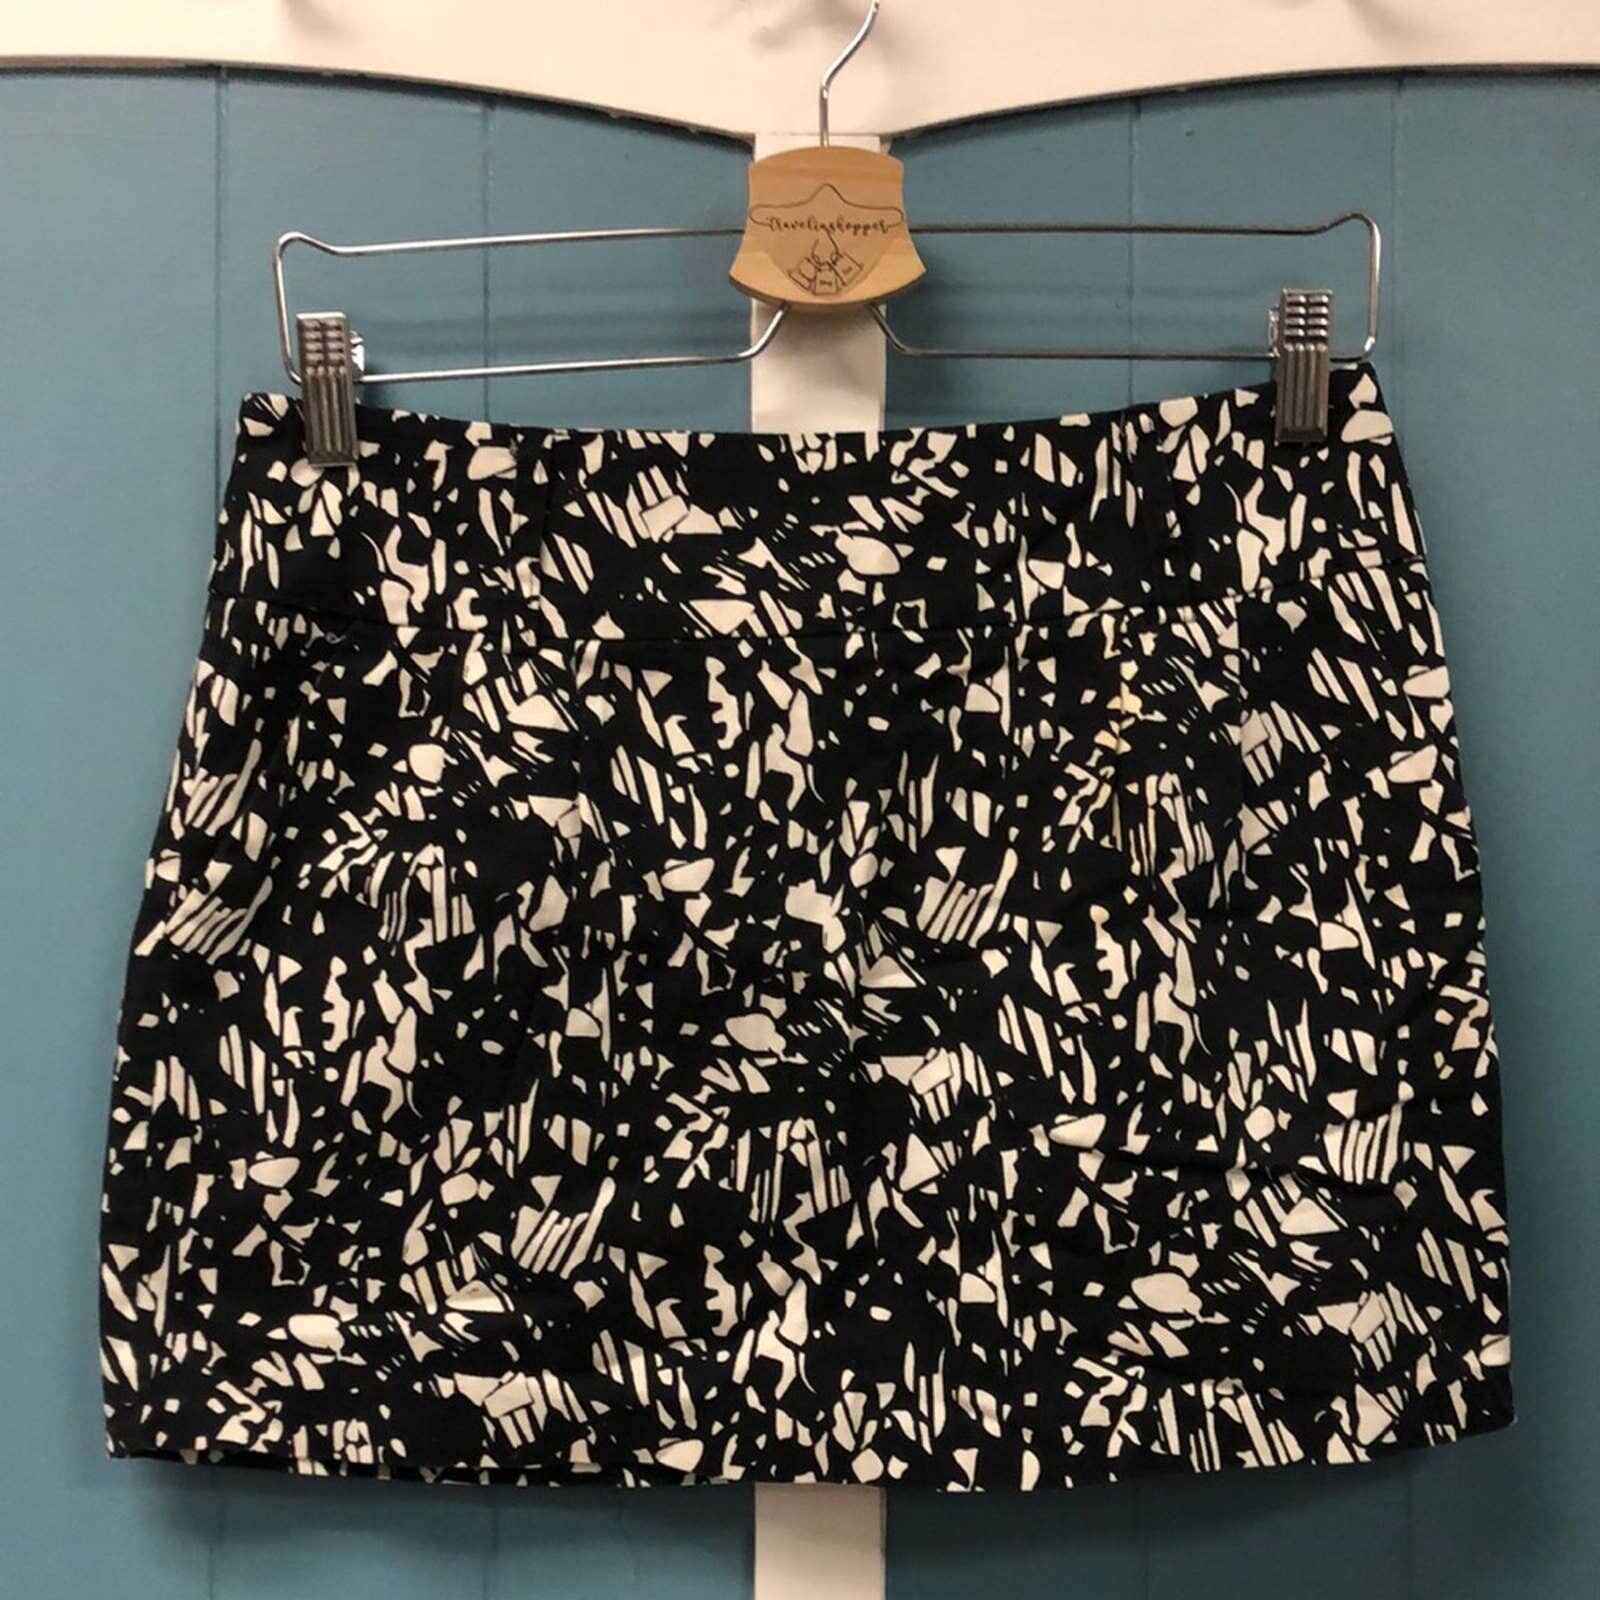 Forever 21 Forever Twenty one black and white mini skirt size M Size 32" / US 10 / IT 46 - 1 Preview